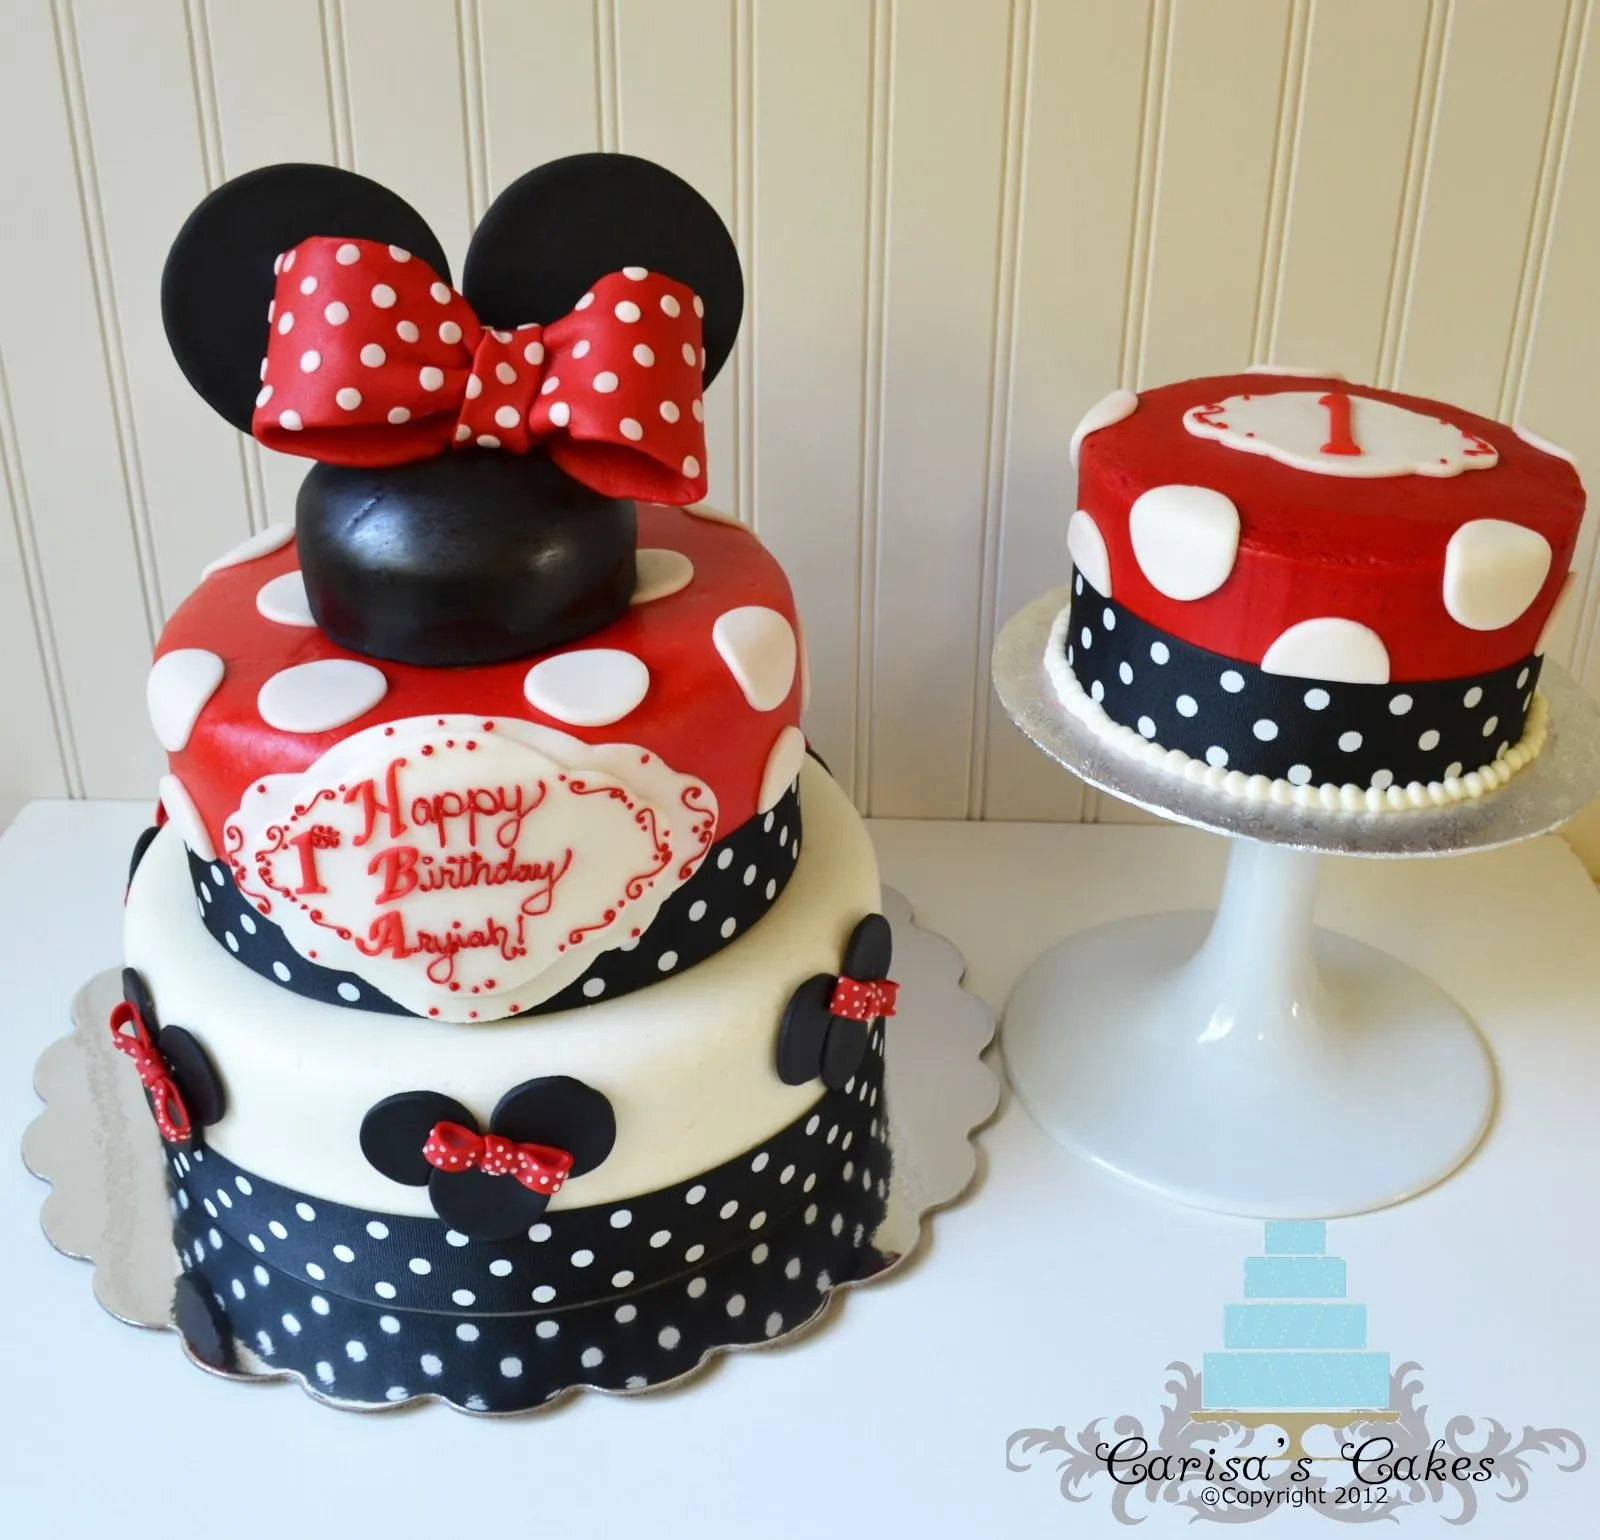 Carisa's Cakes: Minnie Mouse Birthday